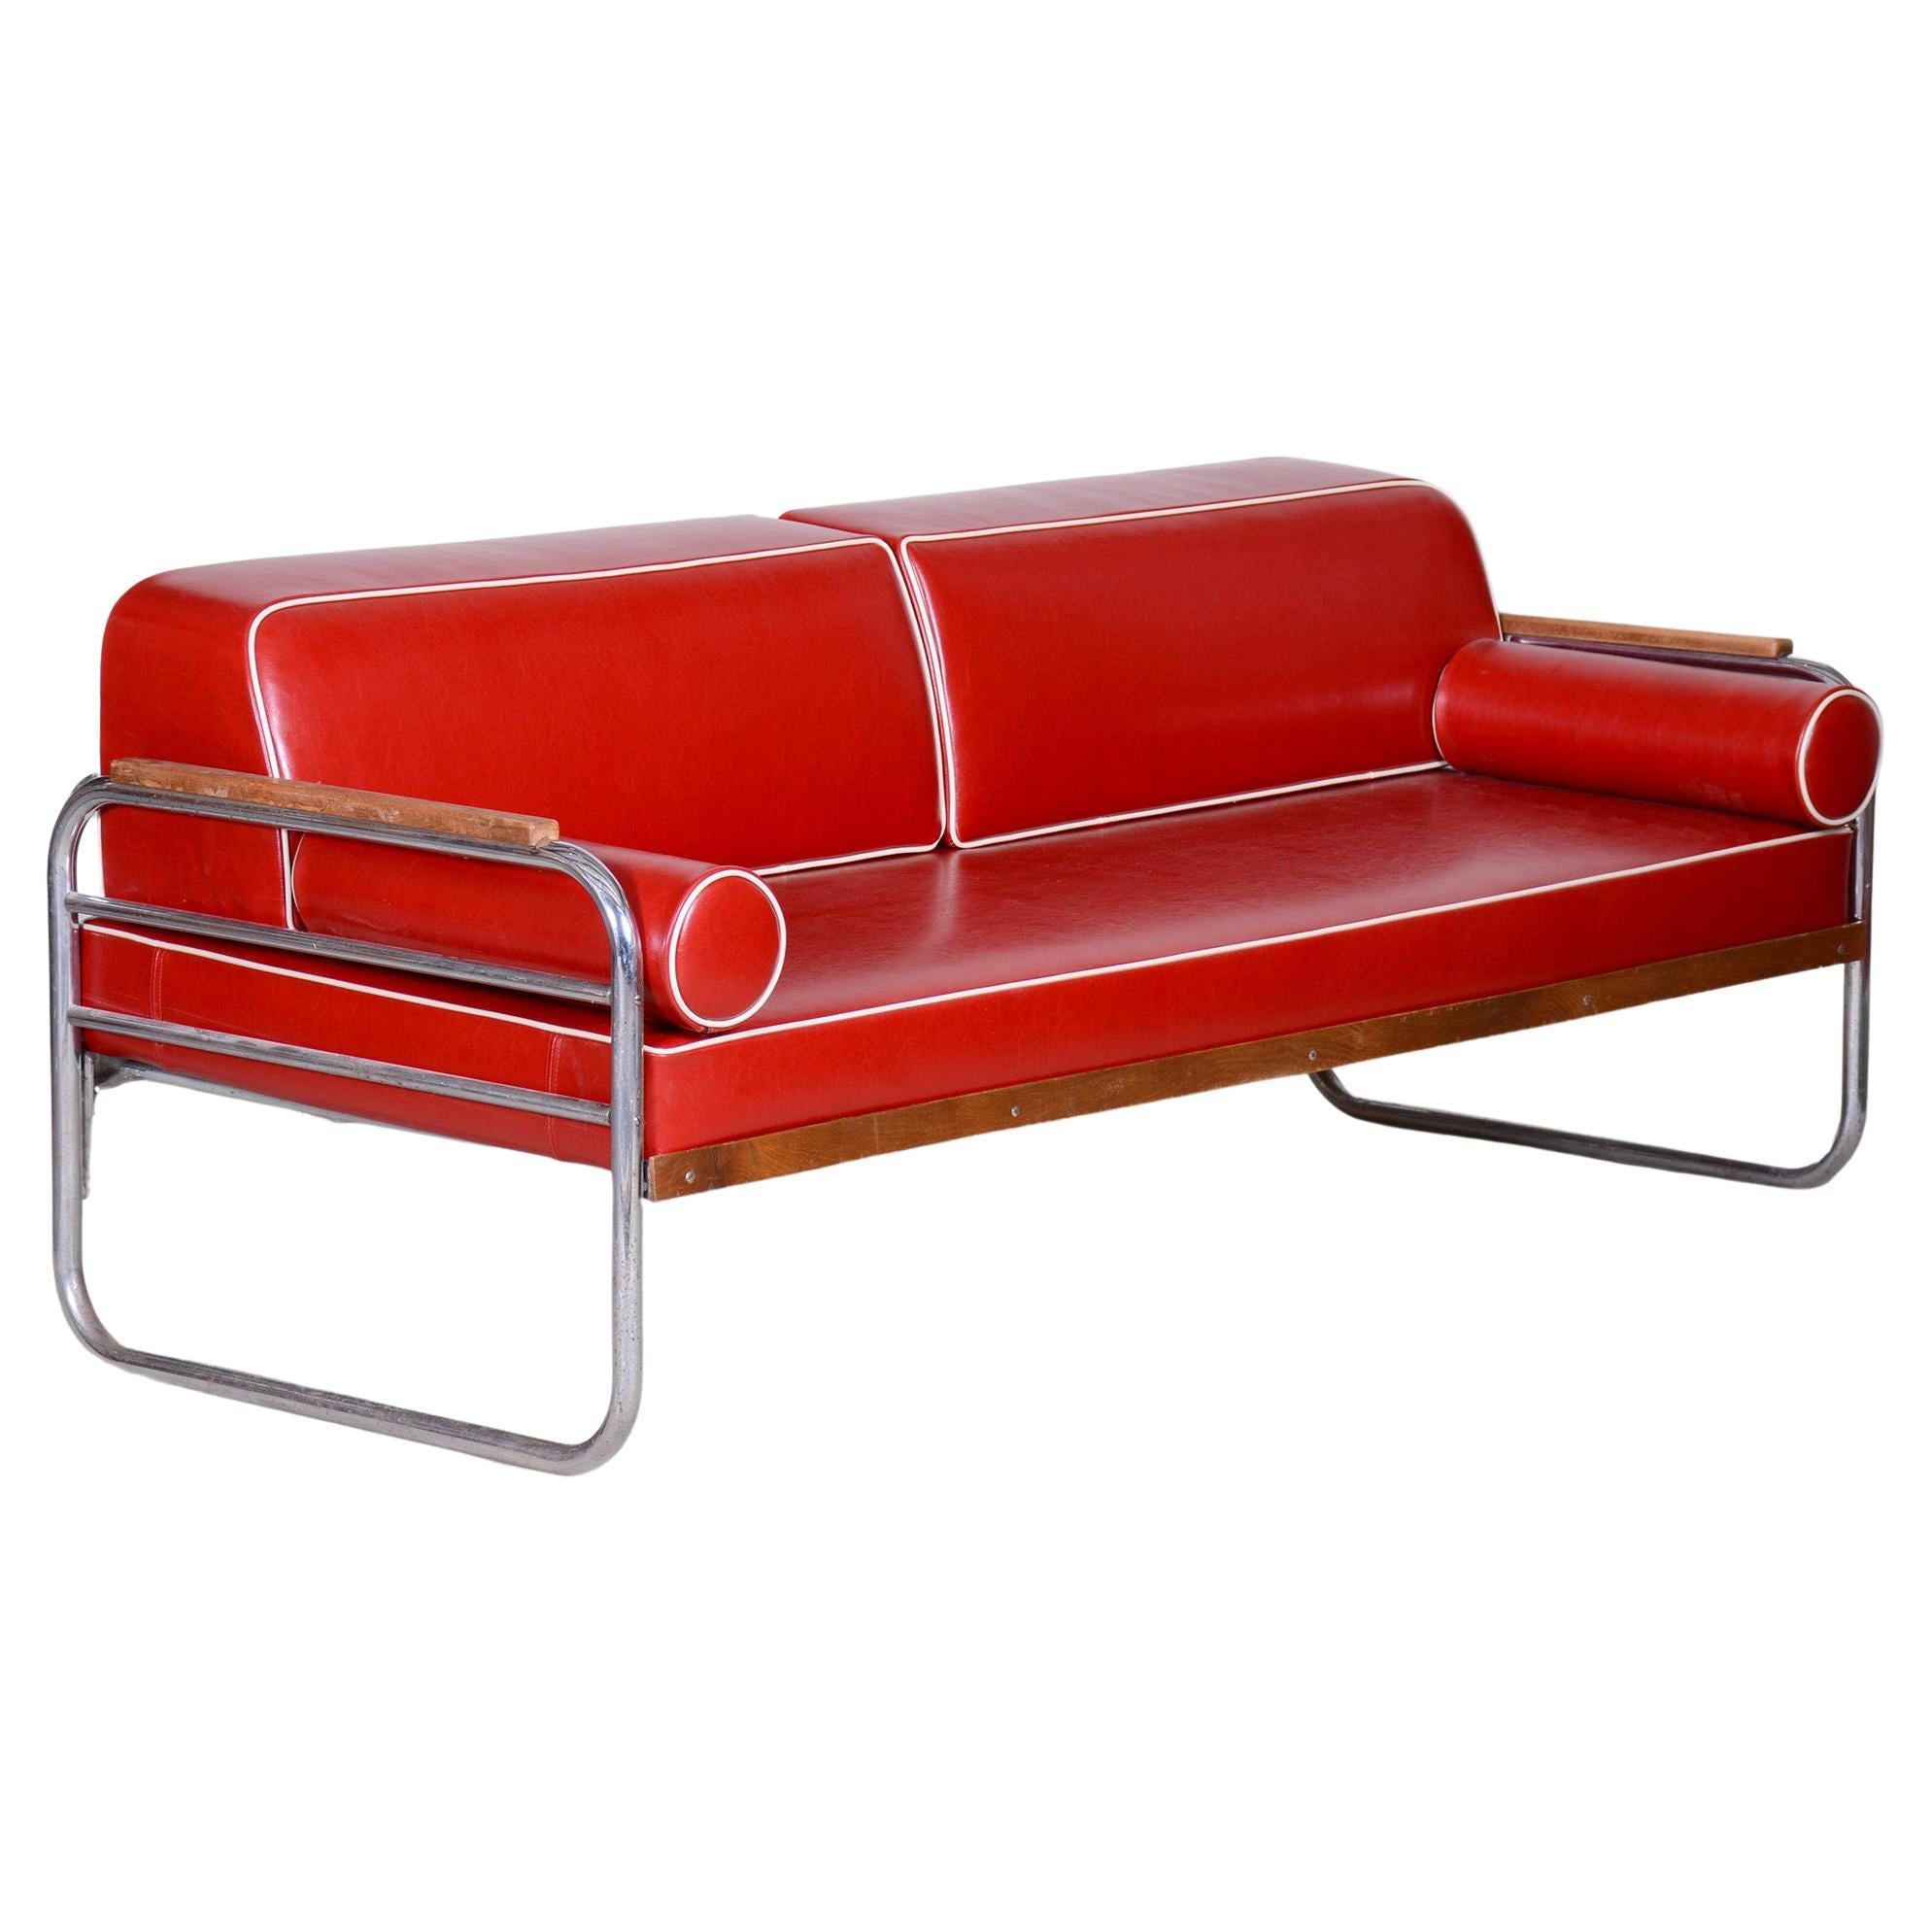 Red High-Quality Leather Bauhaus Sofa by Thonet, Chrome, Fully Restored, 1930s For Sale